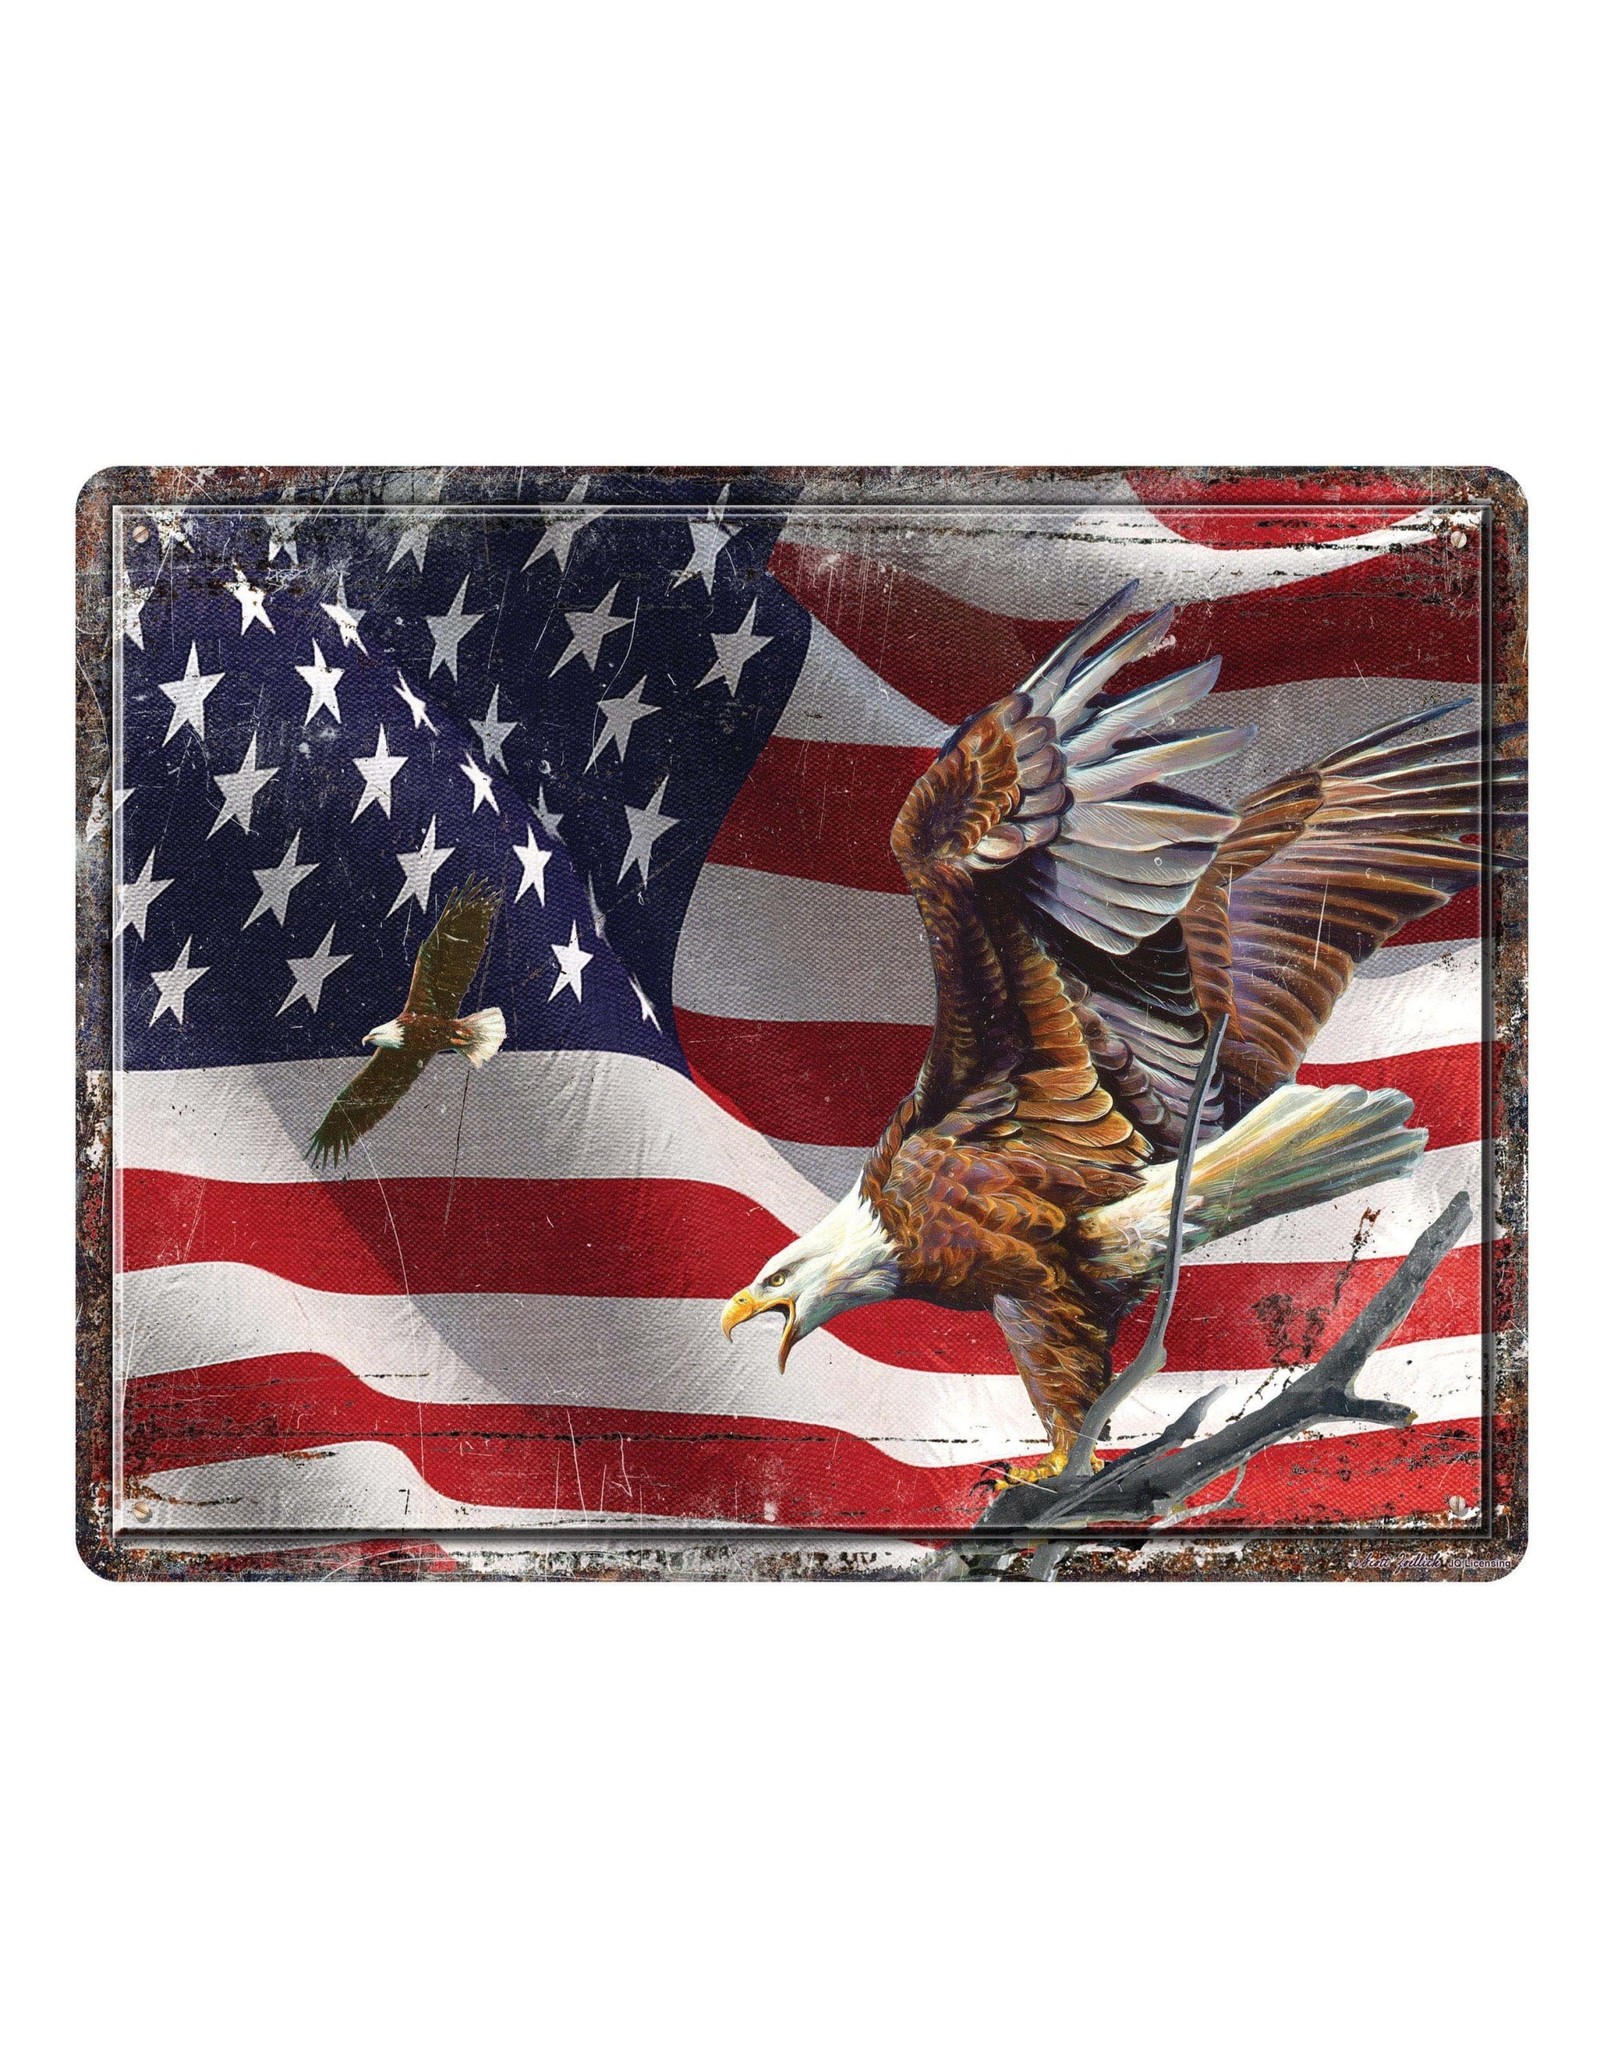 Rivers Edge Products Cutting Board 12in x 16in - American Flag